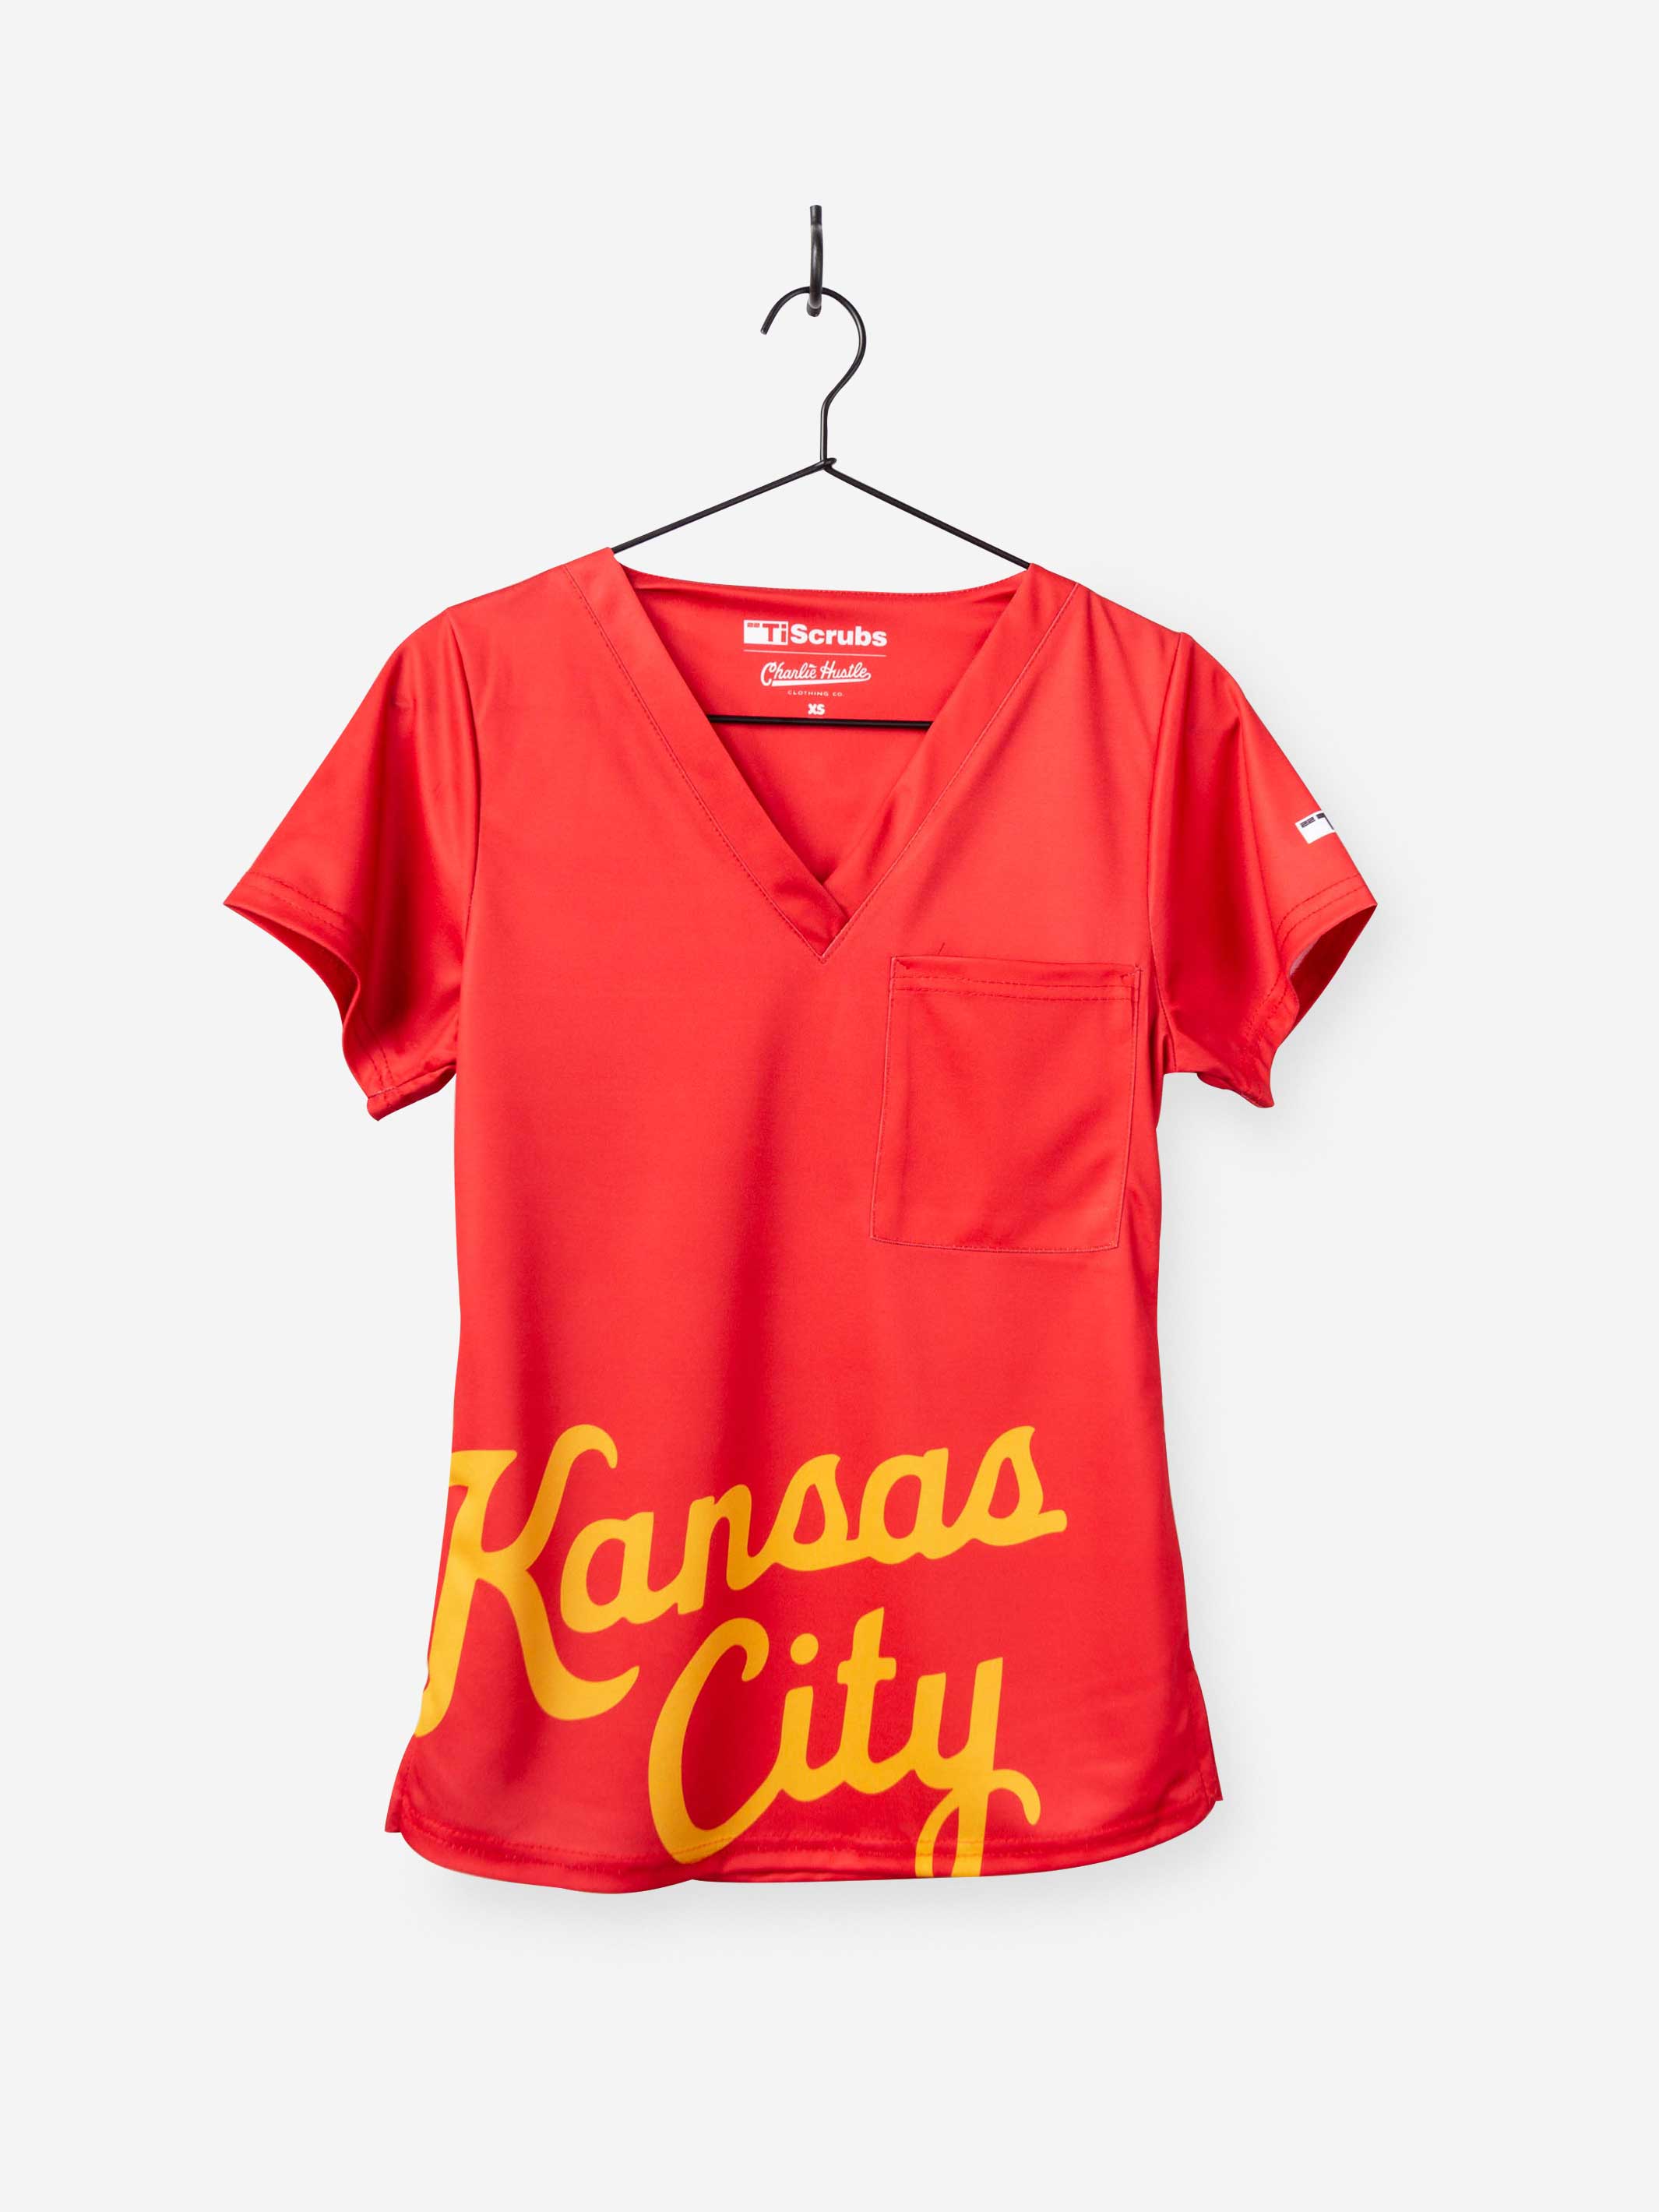 Women&#39;s Charlie Hustle Scrub Top with Kansas City Script in Red and Gold